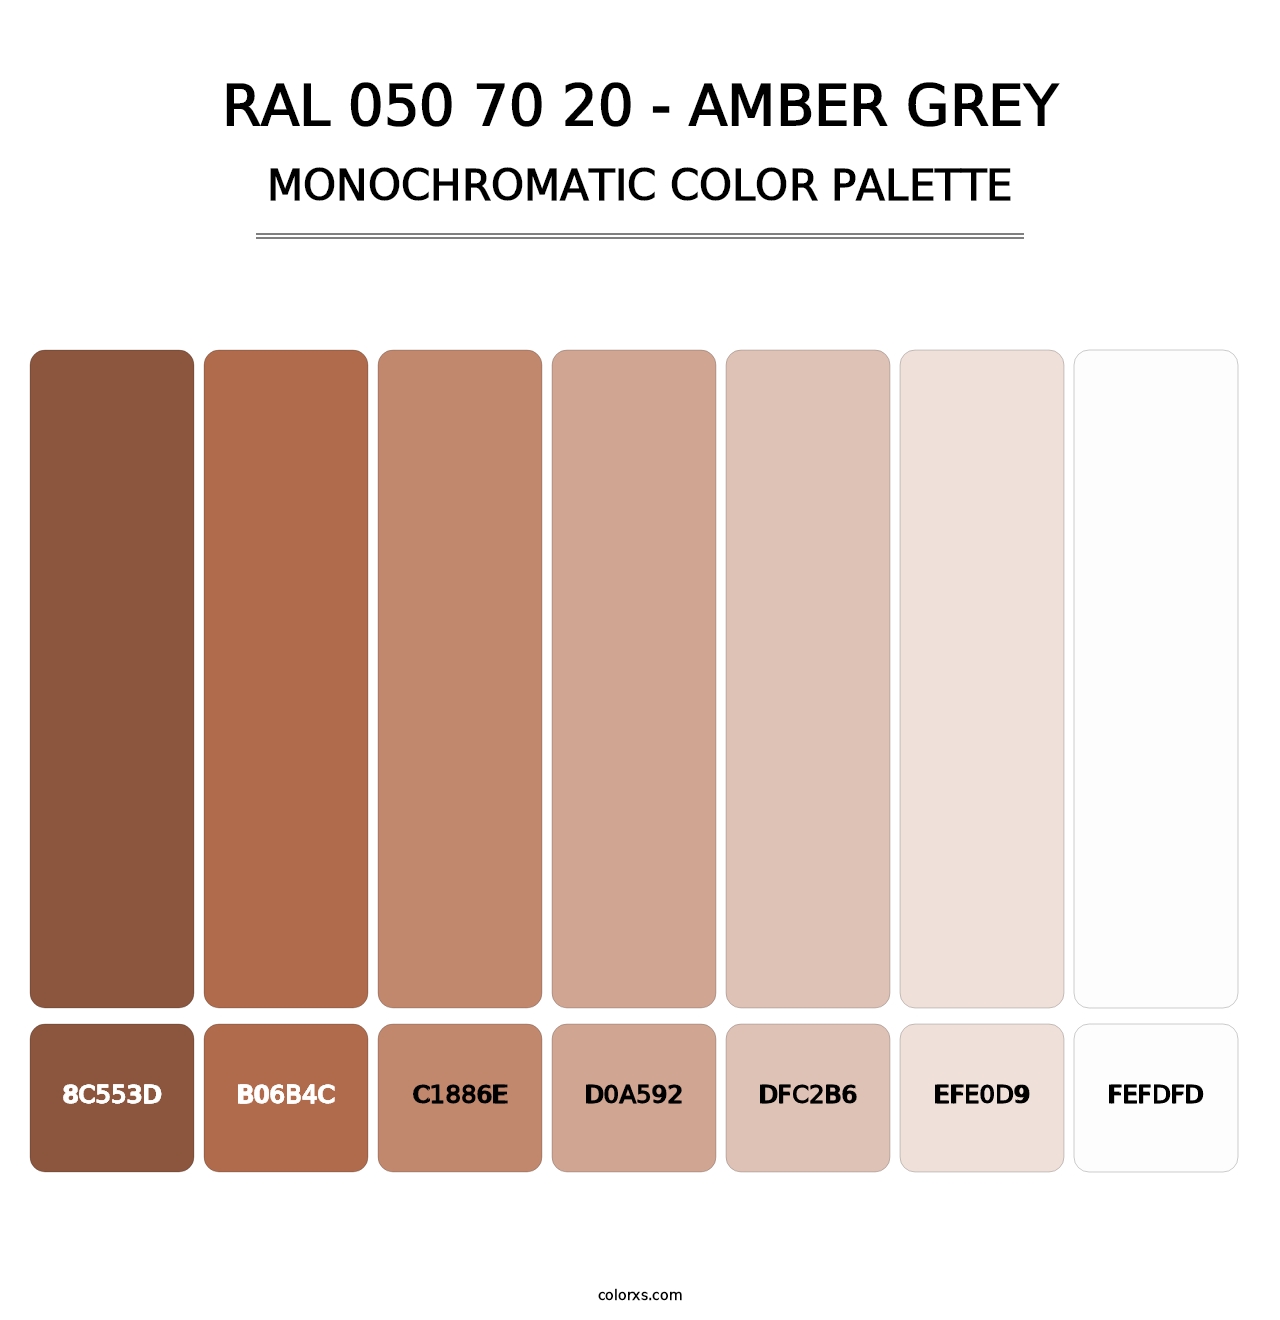 RAL 050 70 20 - Amber Grey - Monochromatic Color Palette